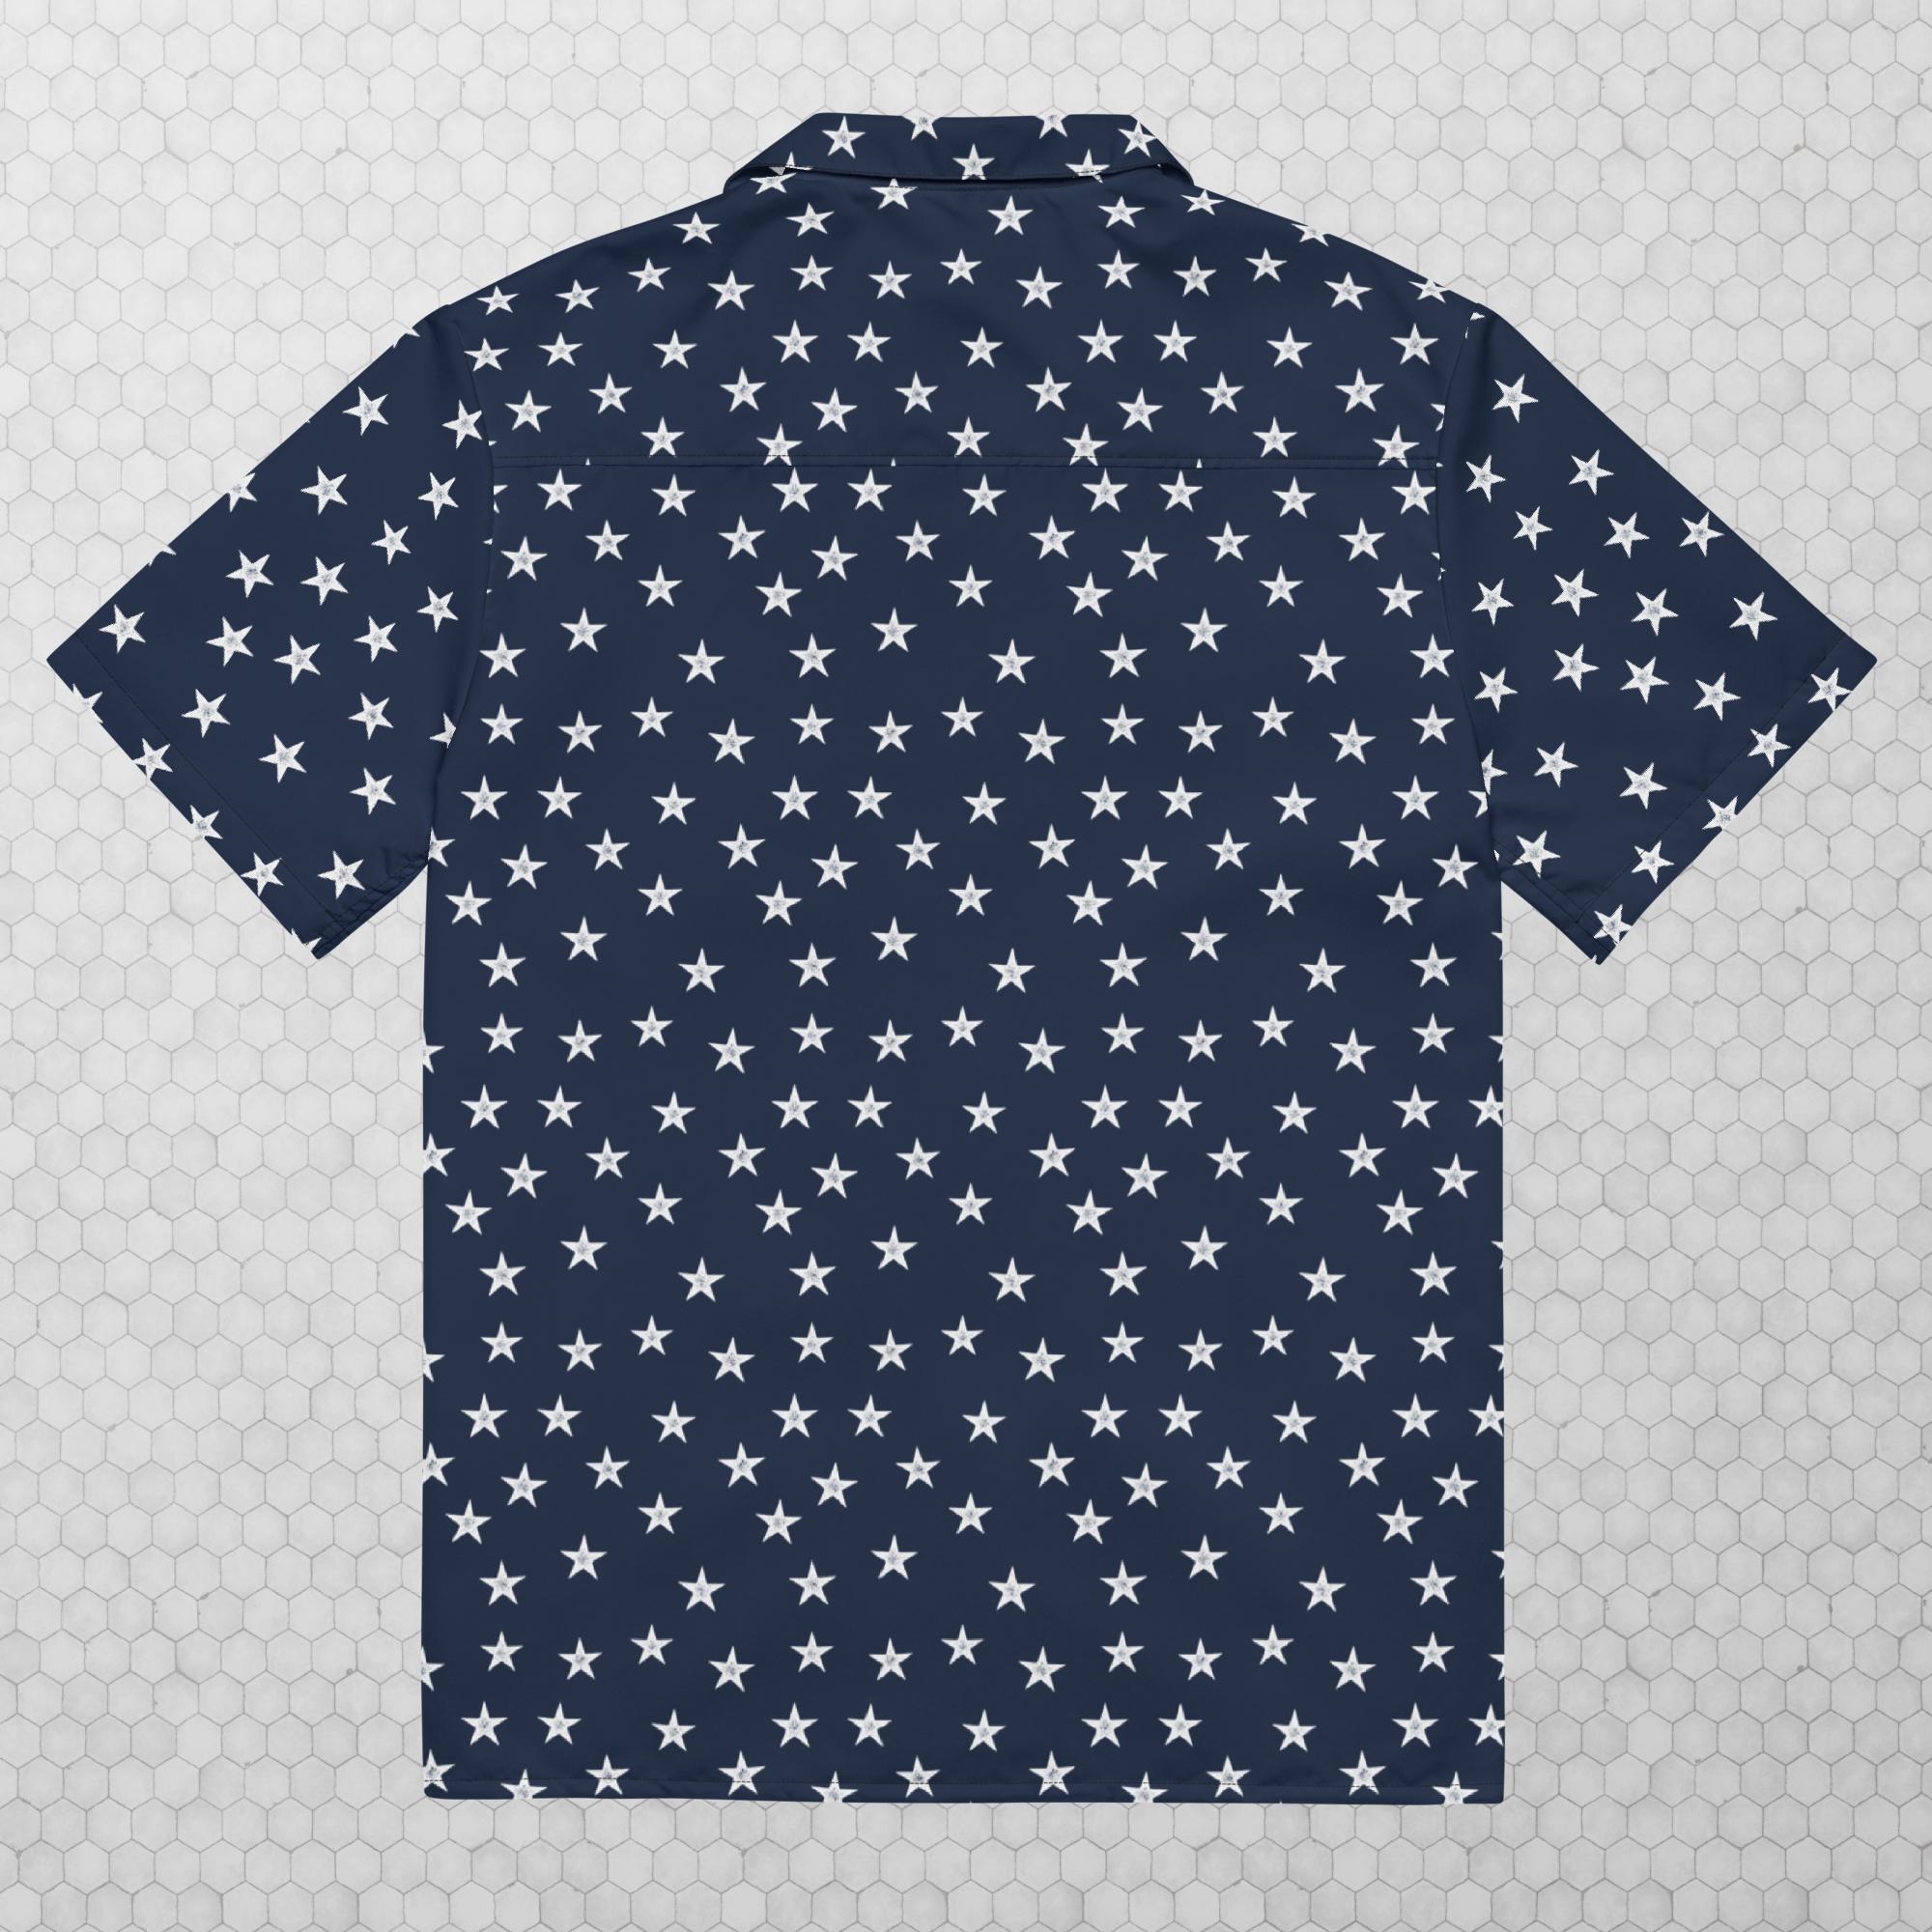 Colonial Stars Button-Up Shirt